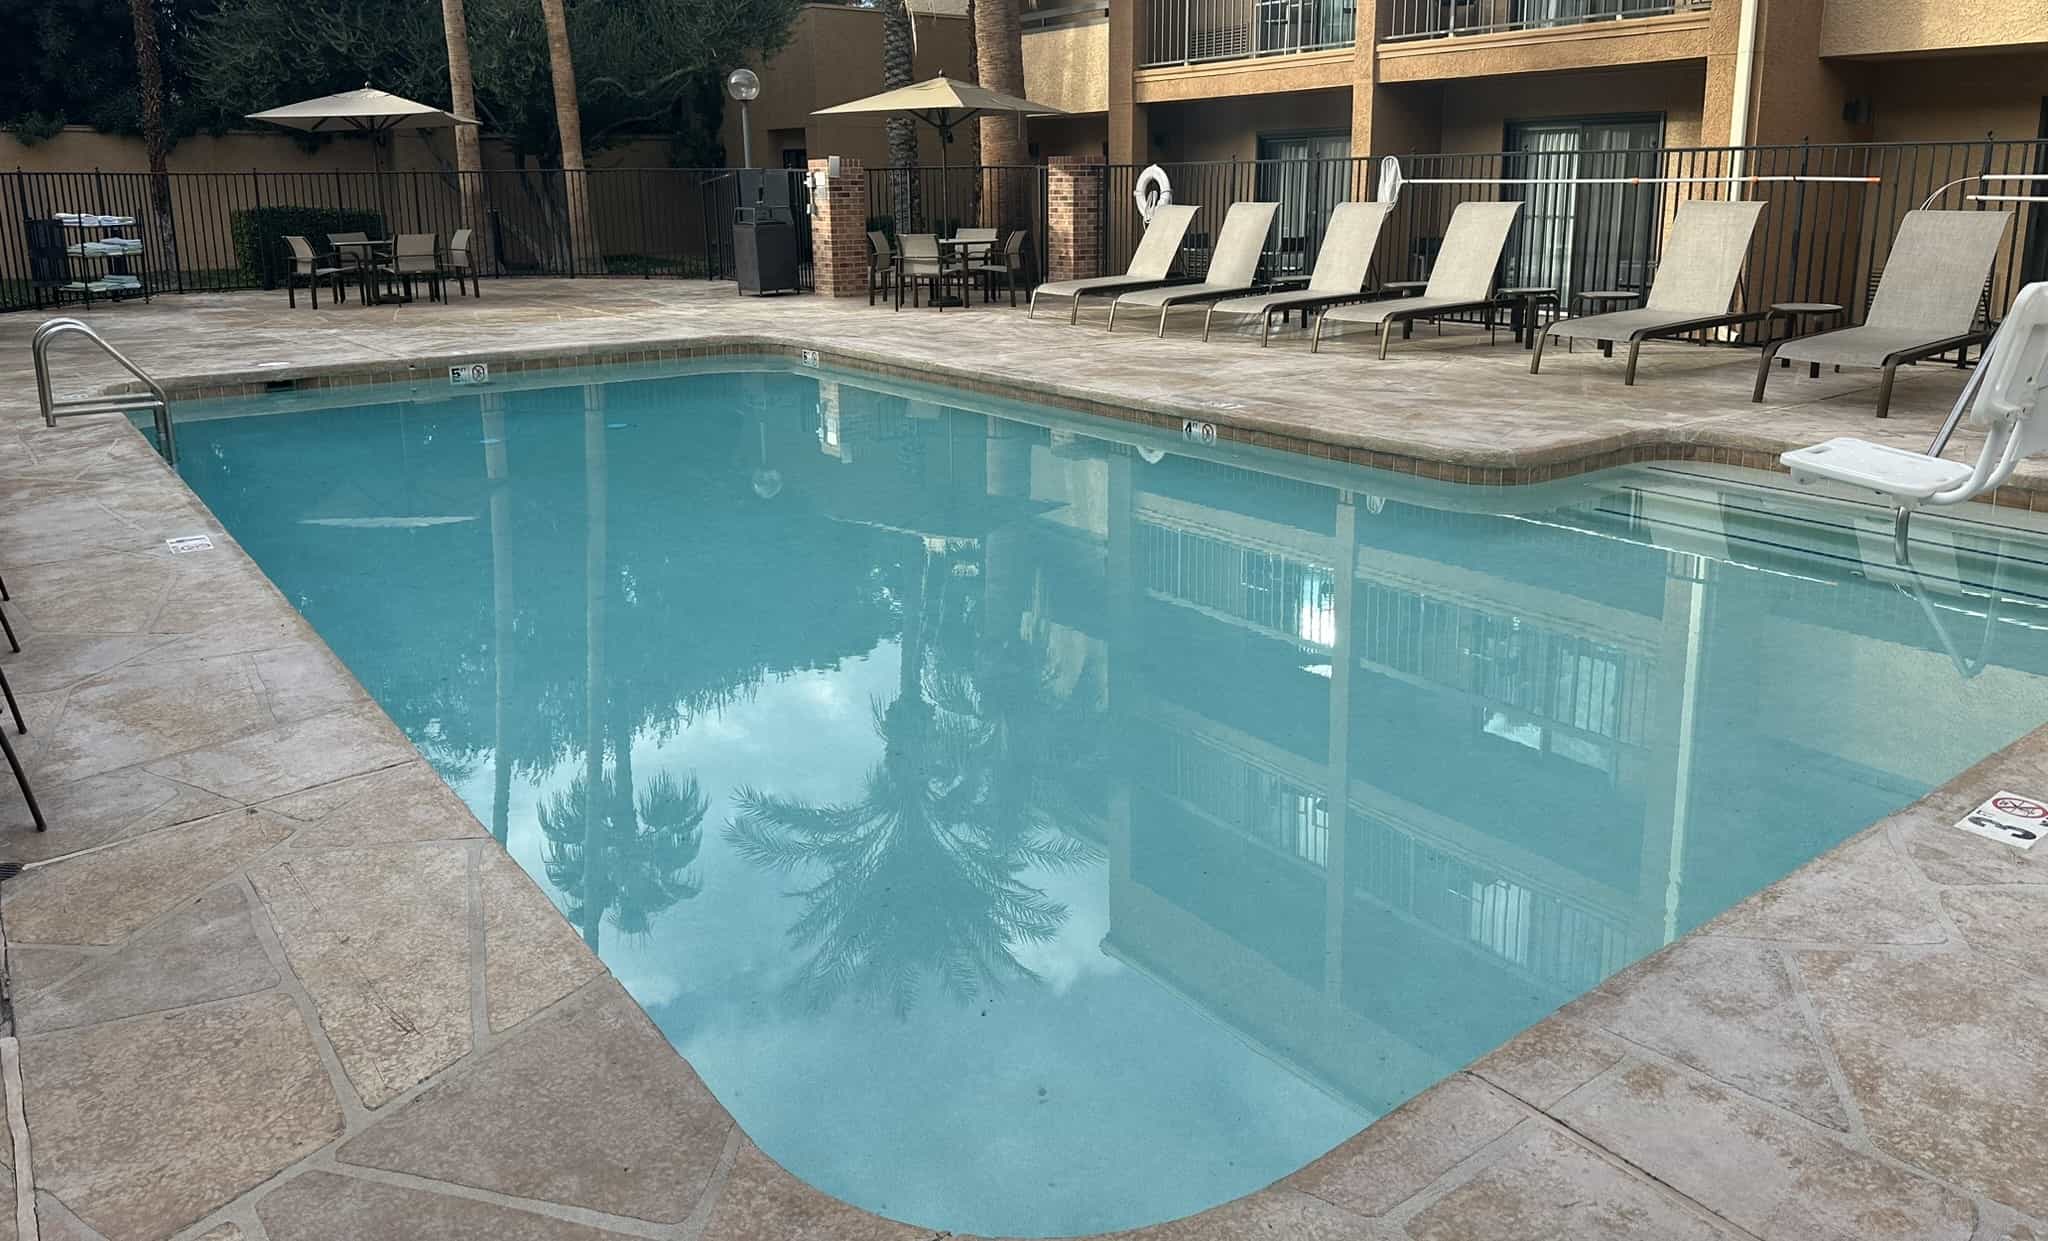 You are currently viewing The Pool at Courtyard by Marriott Las Vegas Convention Center: Season, Hours, Fees and More